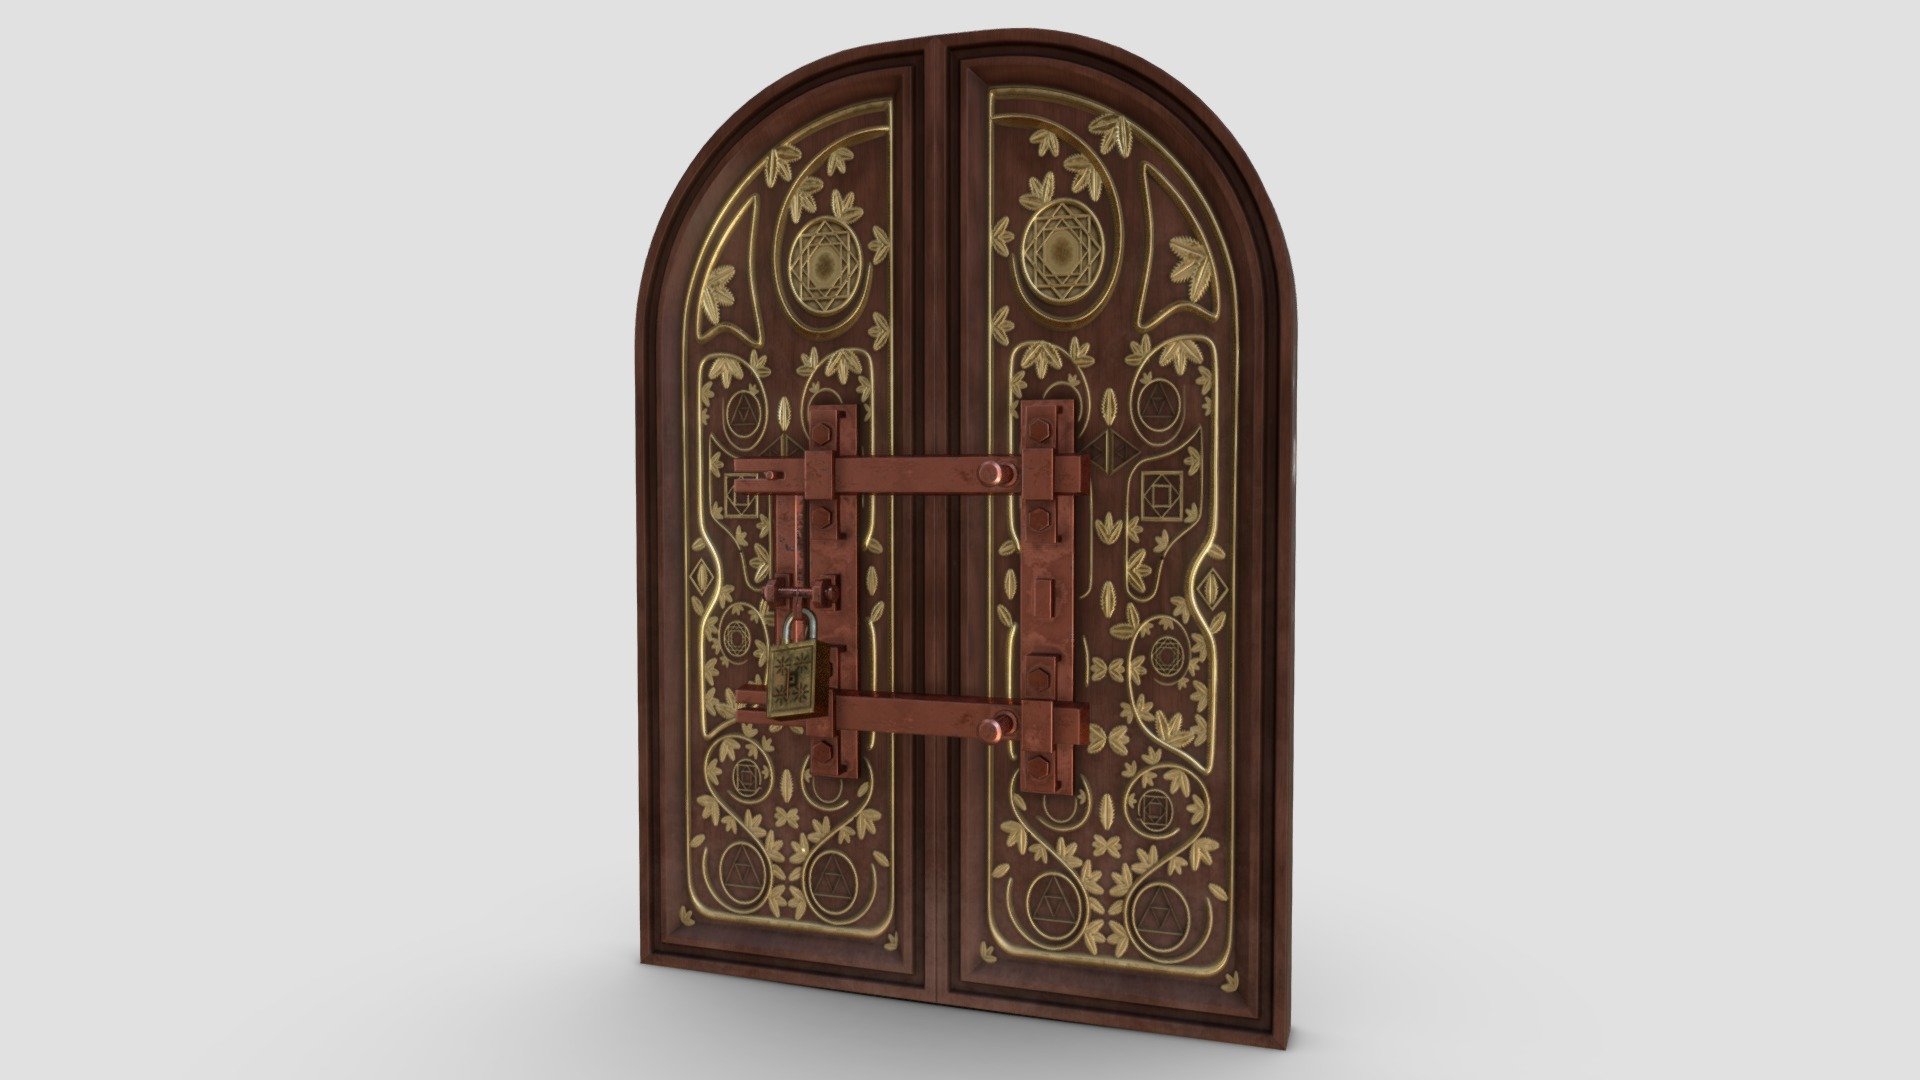 modeling and texturing  Door with locker.
using maya and substance painter
the texture size:
2048x2048

also visit the link to see the images.
https://www.artstation.com/artwork/ol9Pq - Wooden Door Ornament - Buy Royalty Free 3D model by KloWorks 3d model